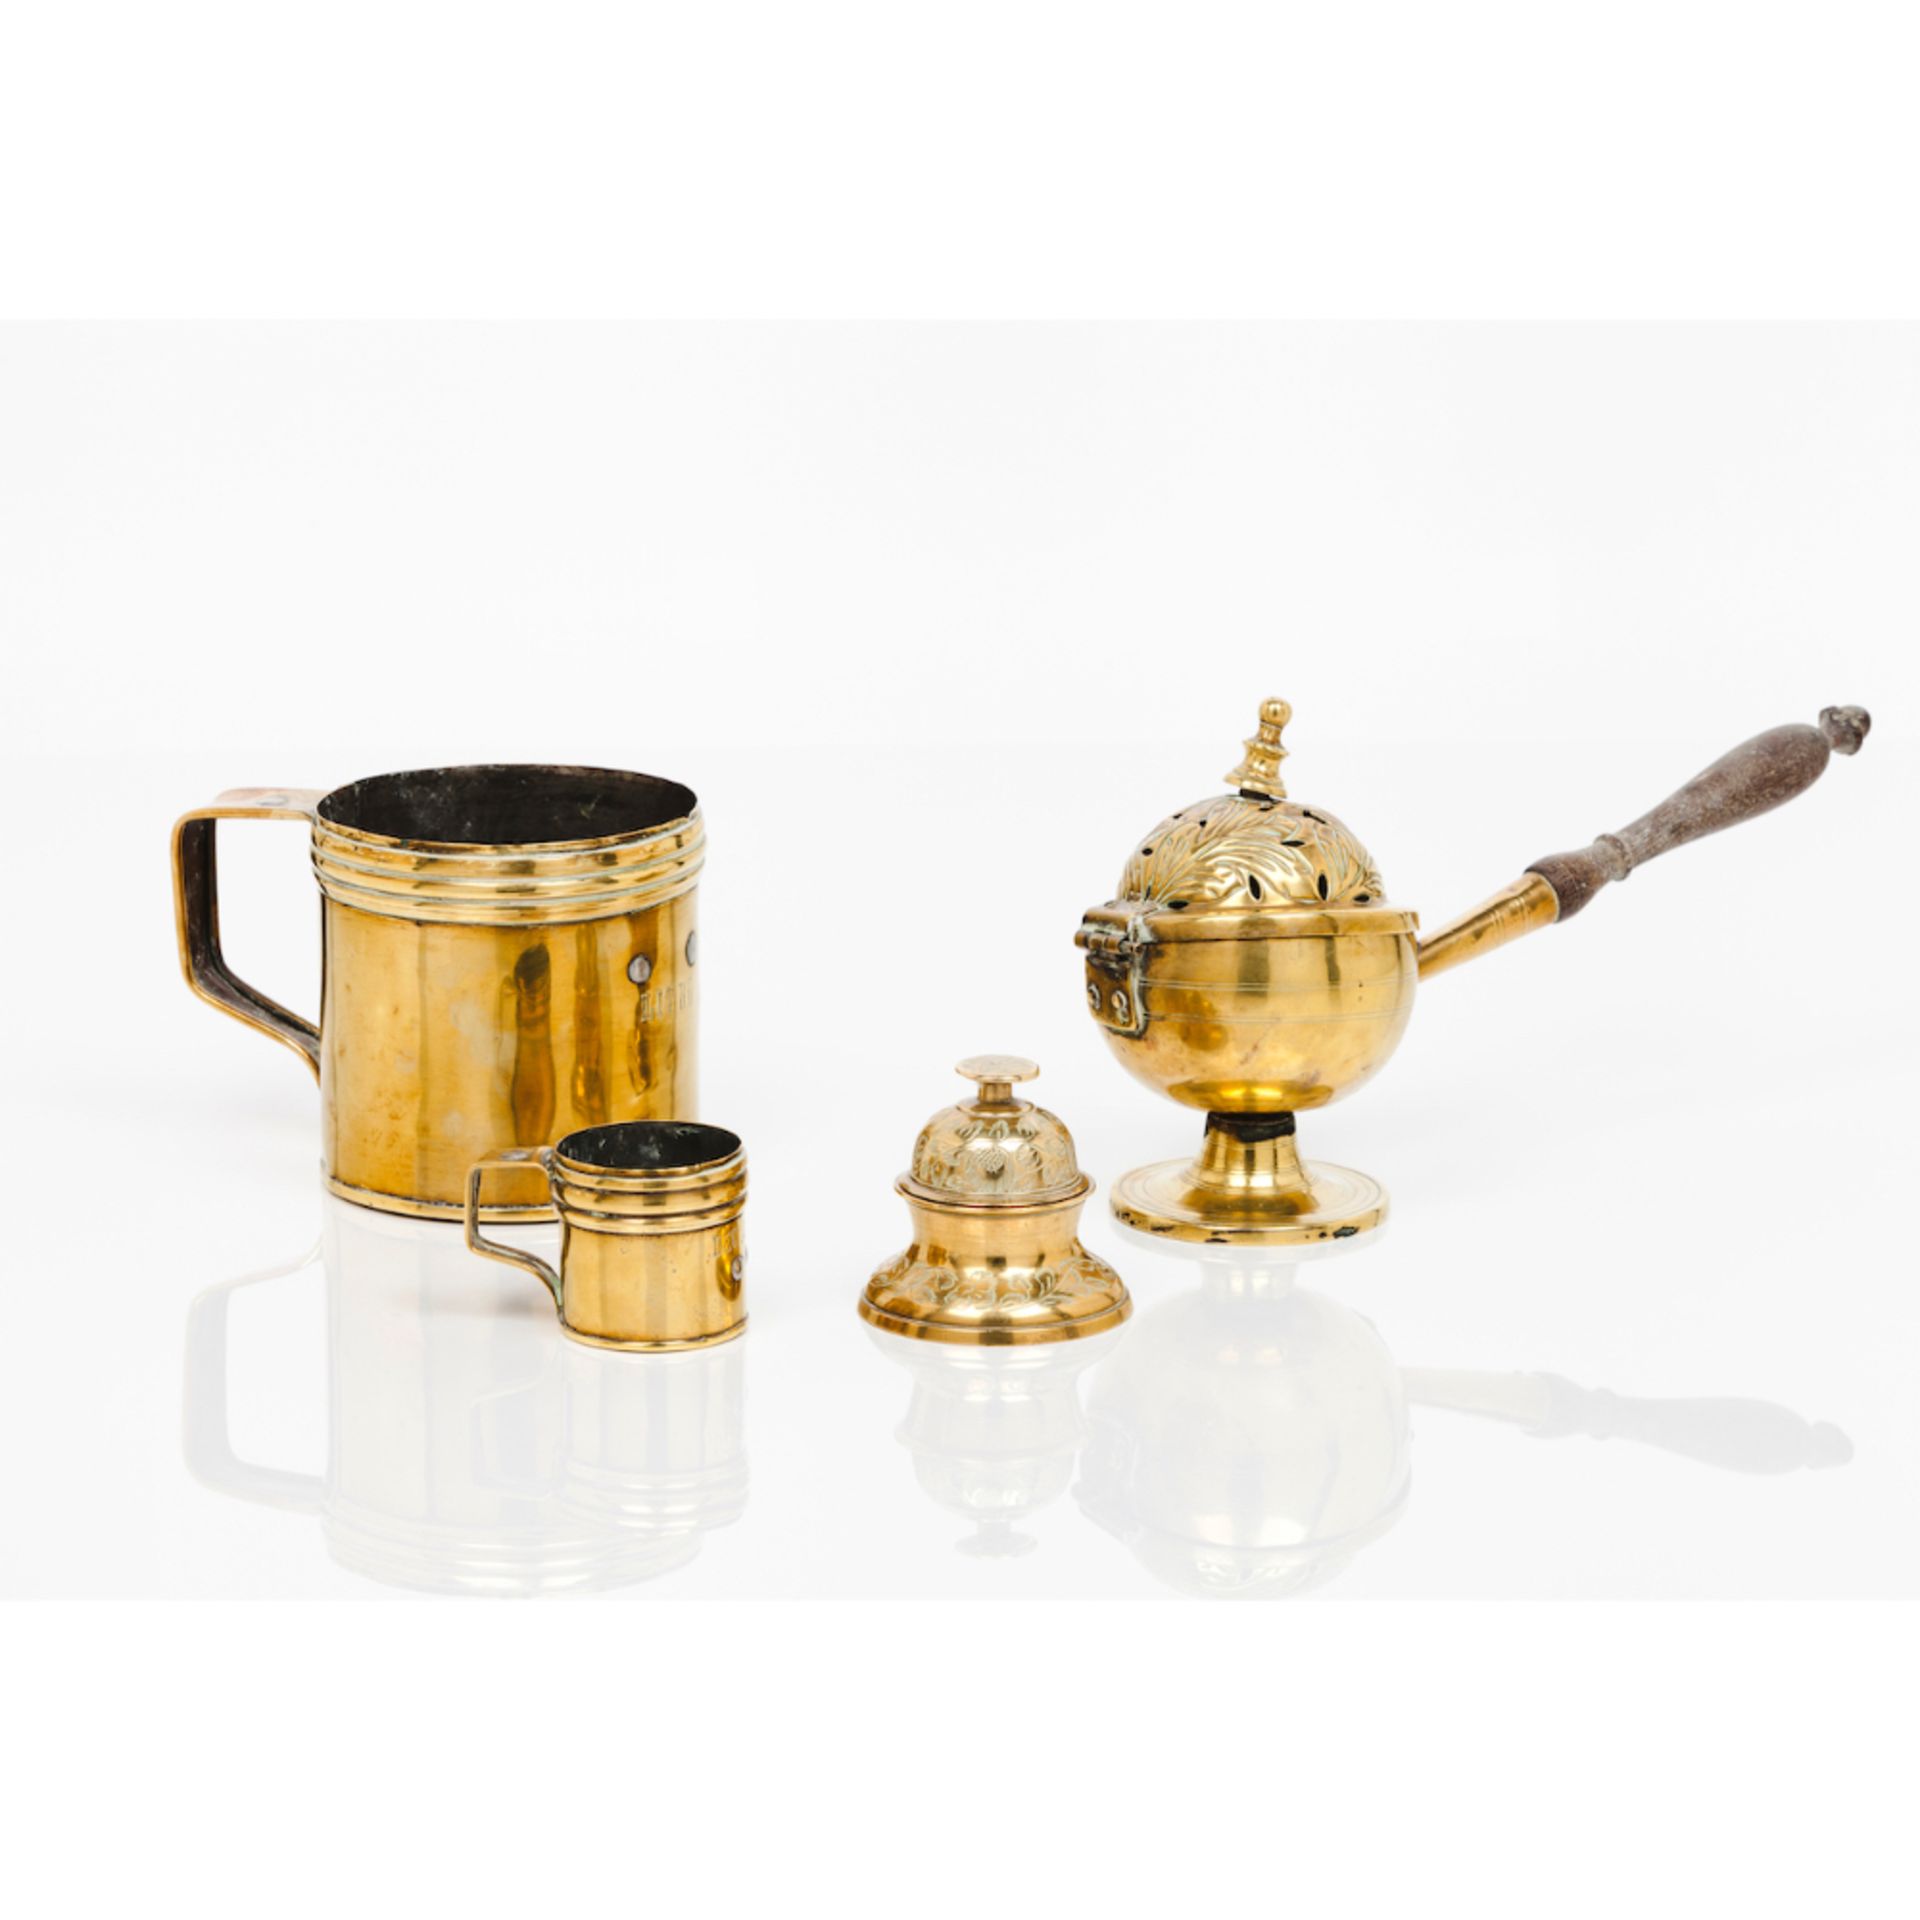 A group of four piecesPerfume burner, bell and two measures Brass (signs of wear, losses to